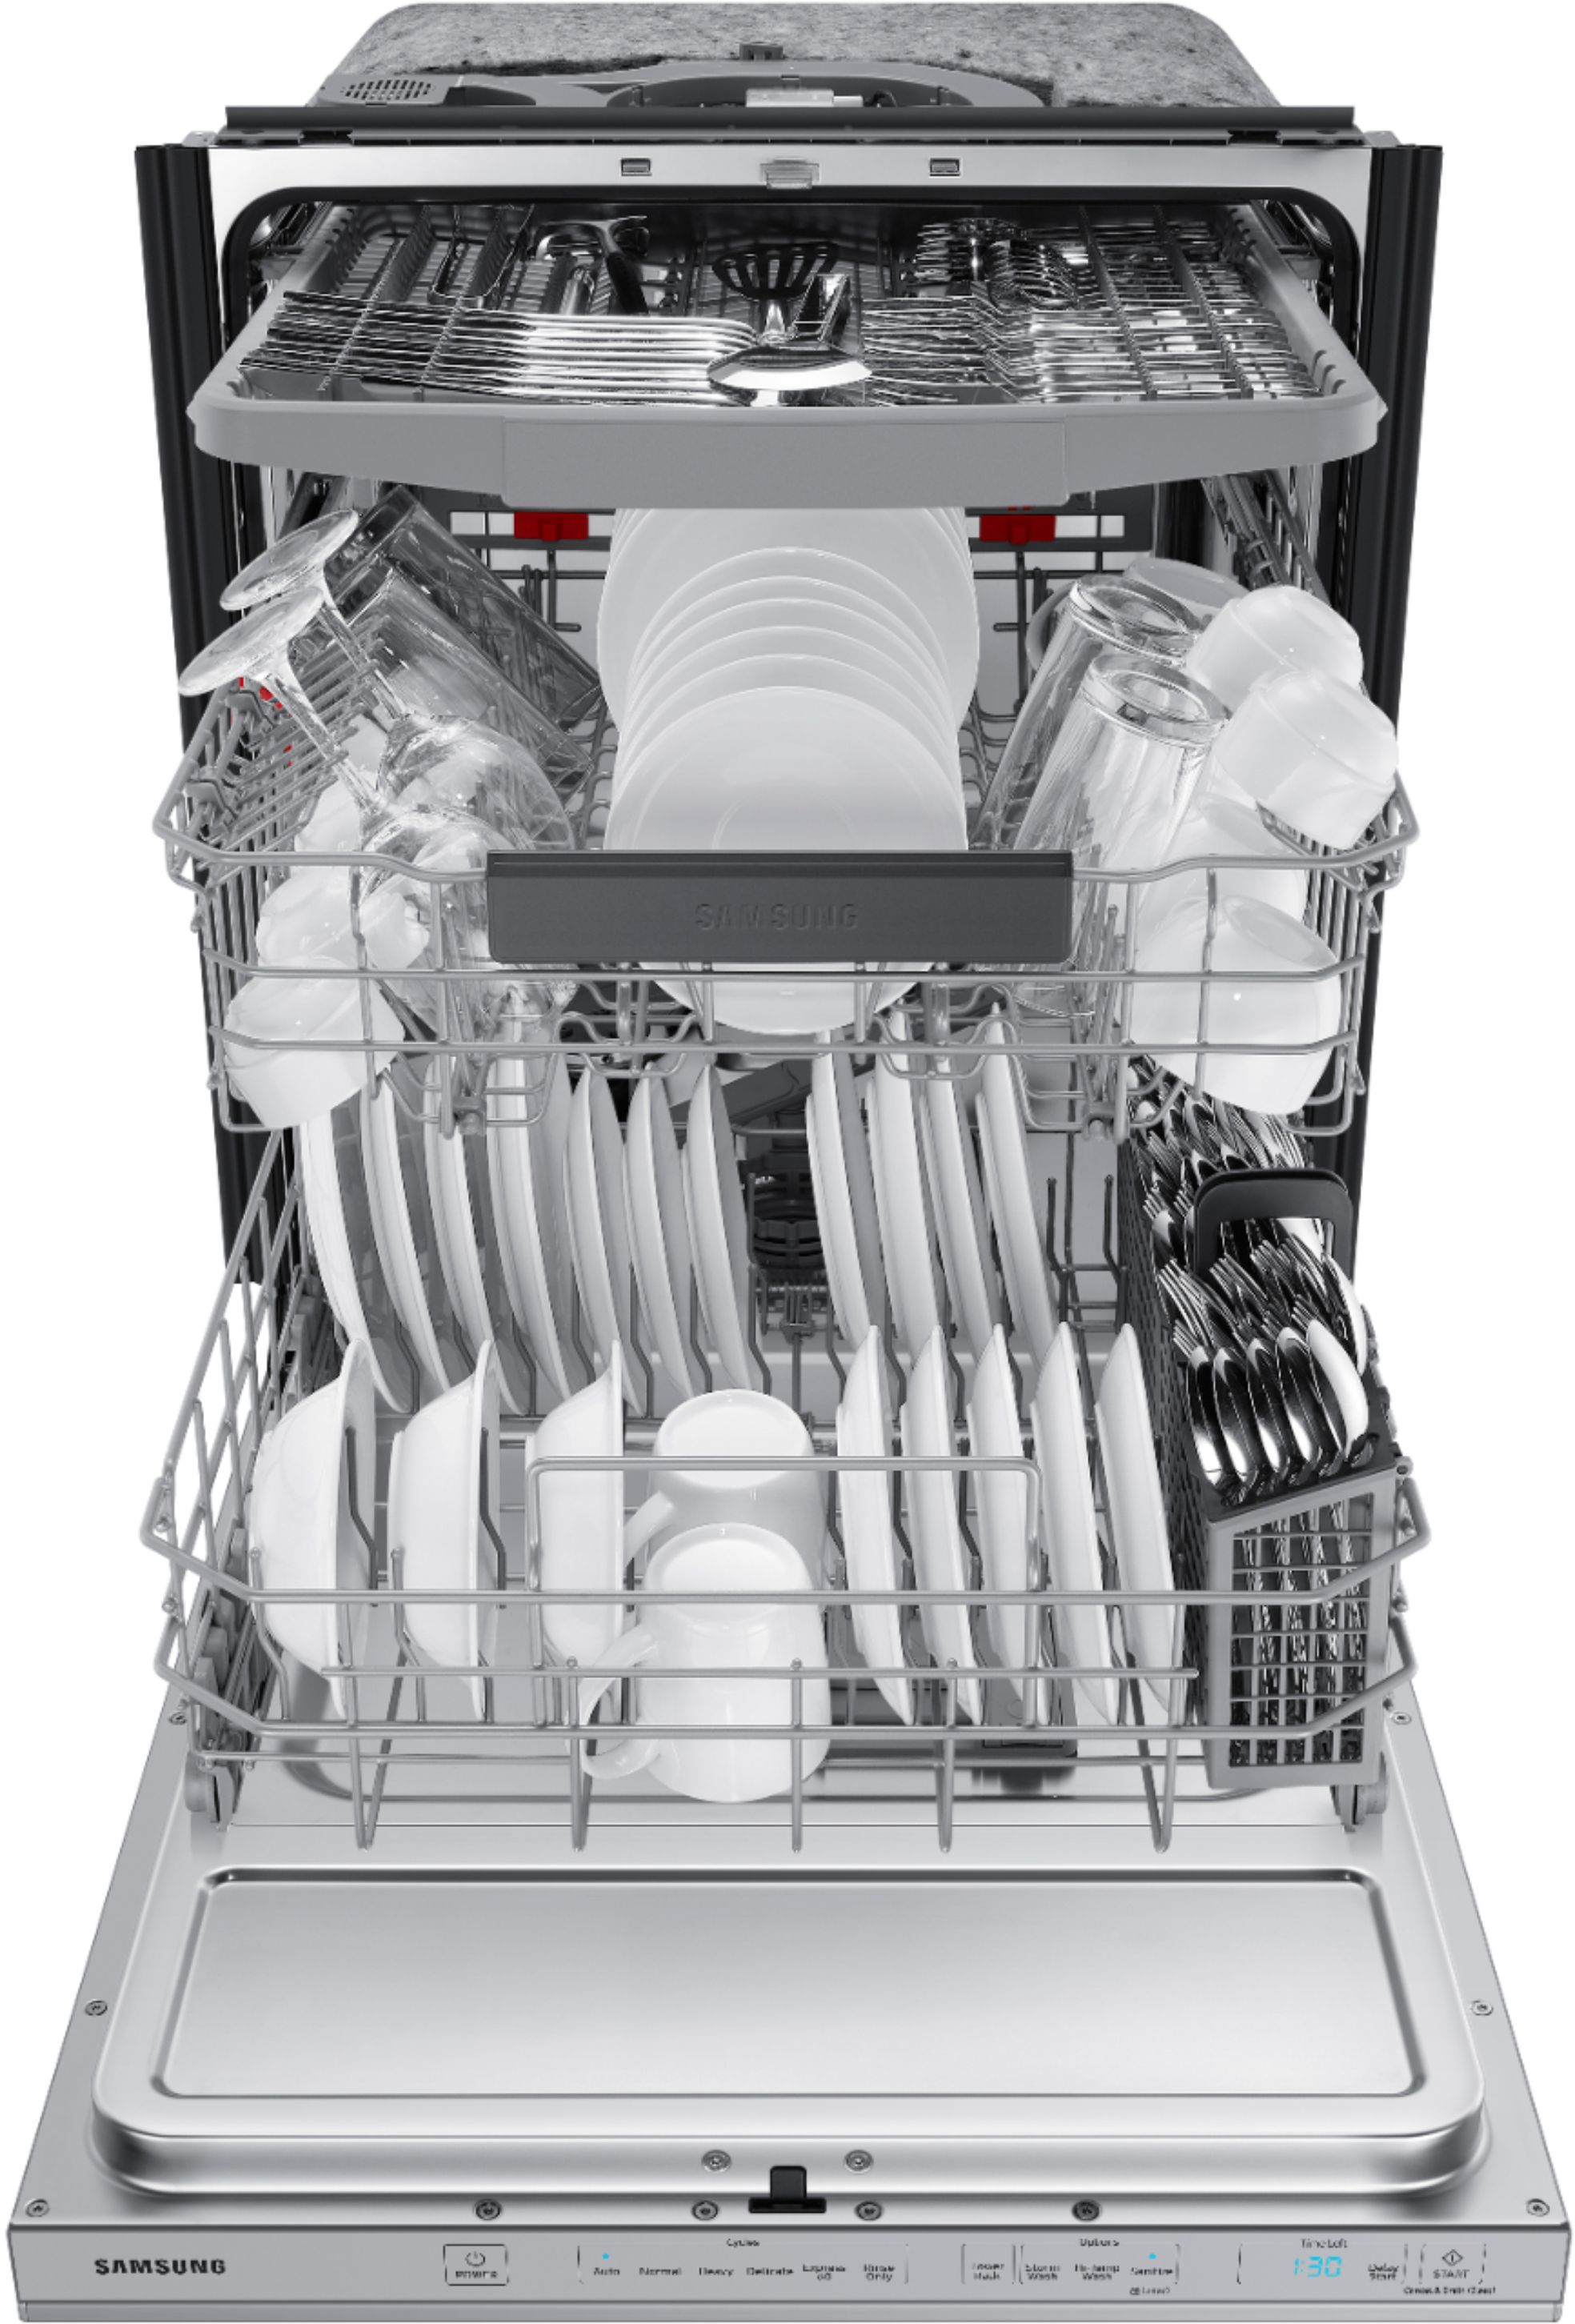 DW80R5061US Samsung 24 Built In Dishwasher with StormWash - Flat Handle -  Fingerprint Resistant Stainless Steel